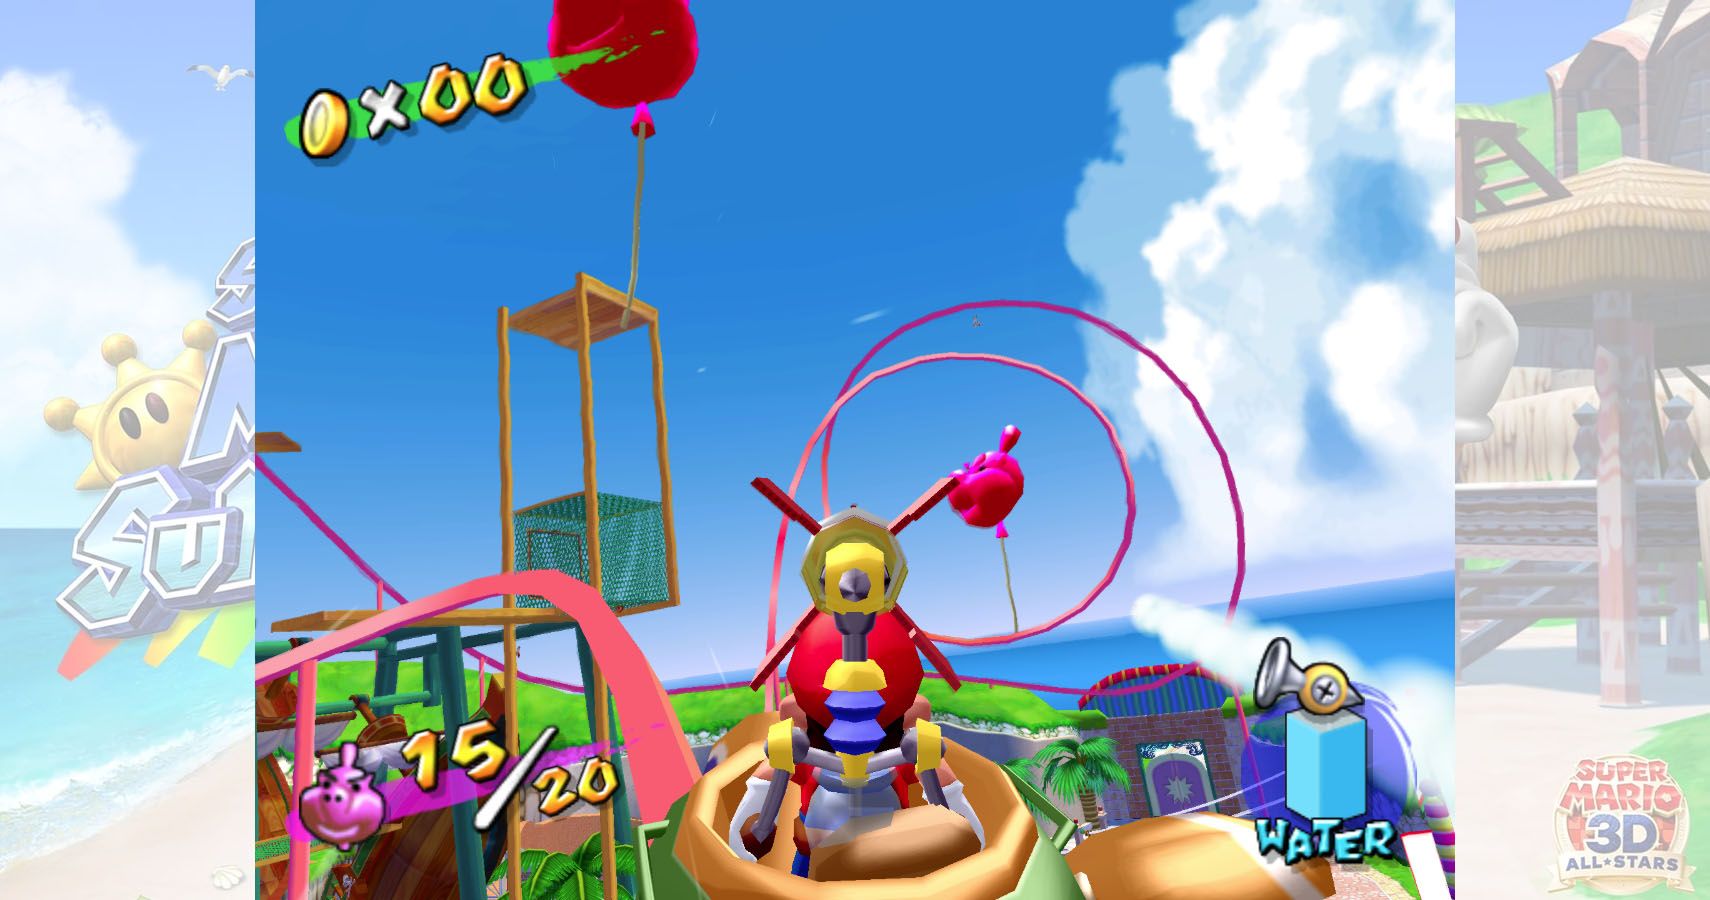 Mario on a rollercoaster in pinna park hitting baloons in super mario sunshine.